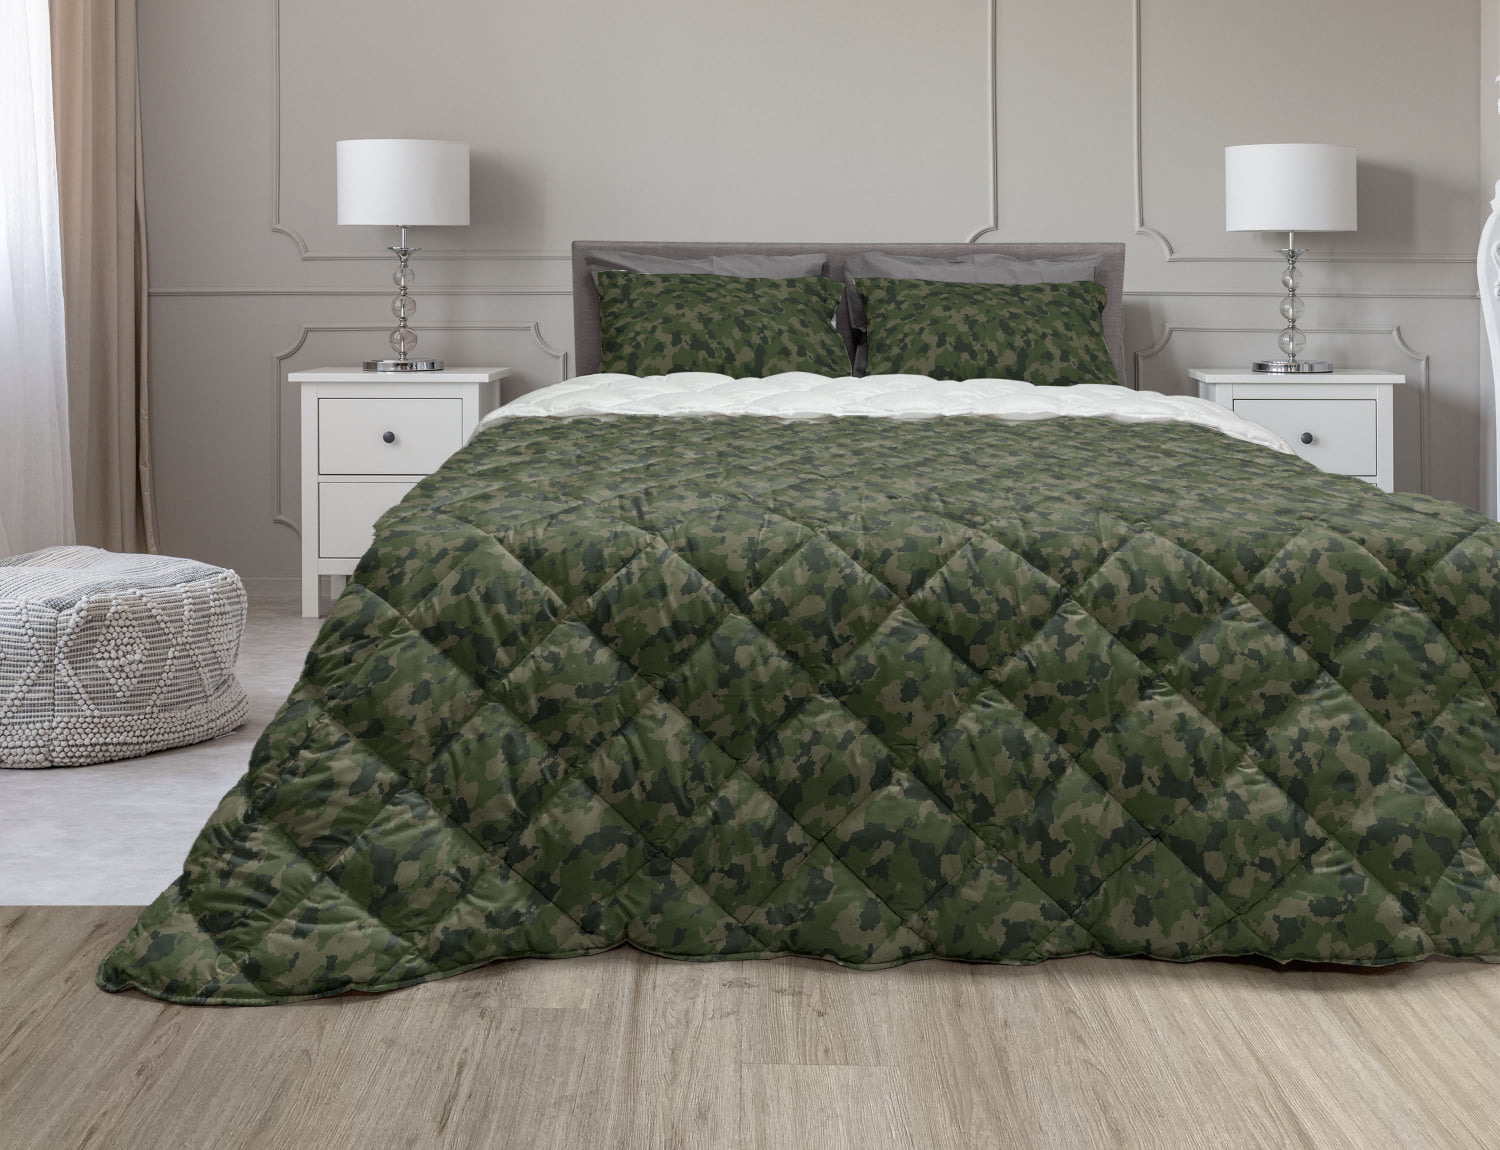 Gray THE WOODS WOODLAND CAMO Full-Queen COMFORTER-FREE SHIP 